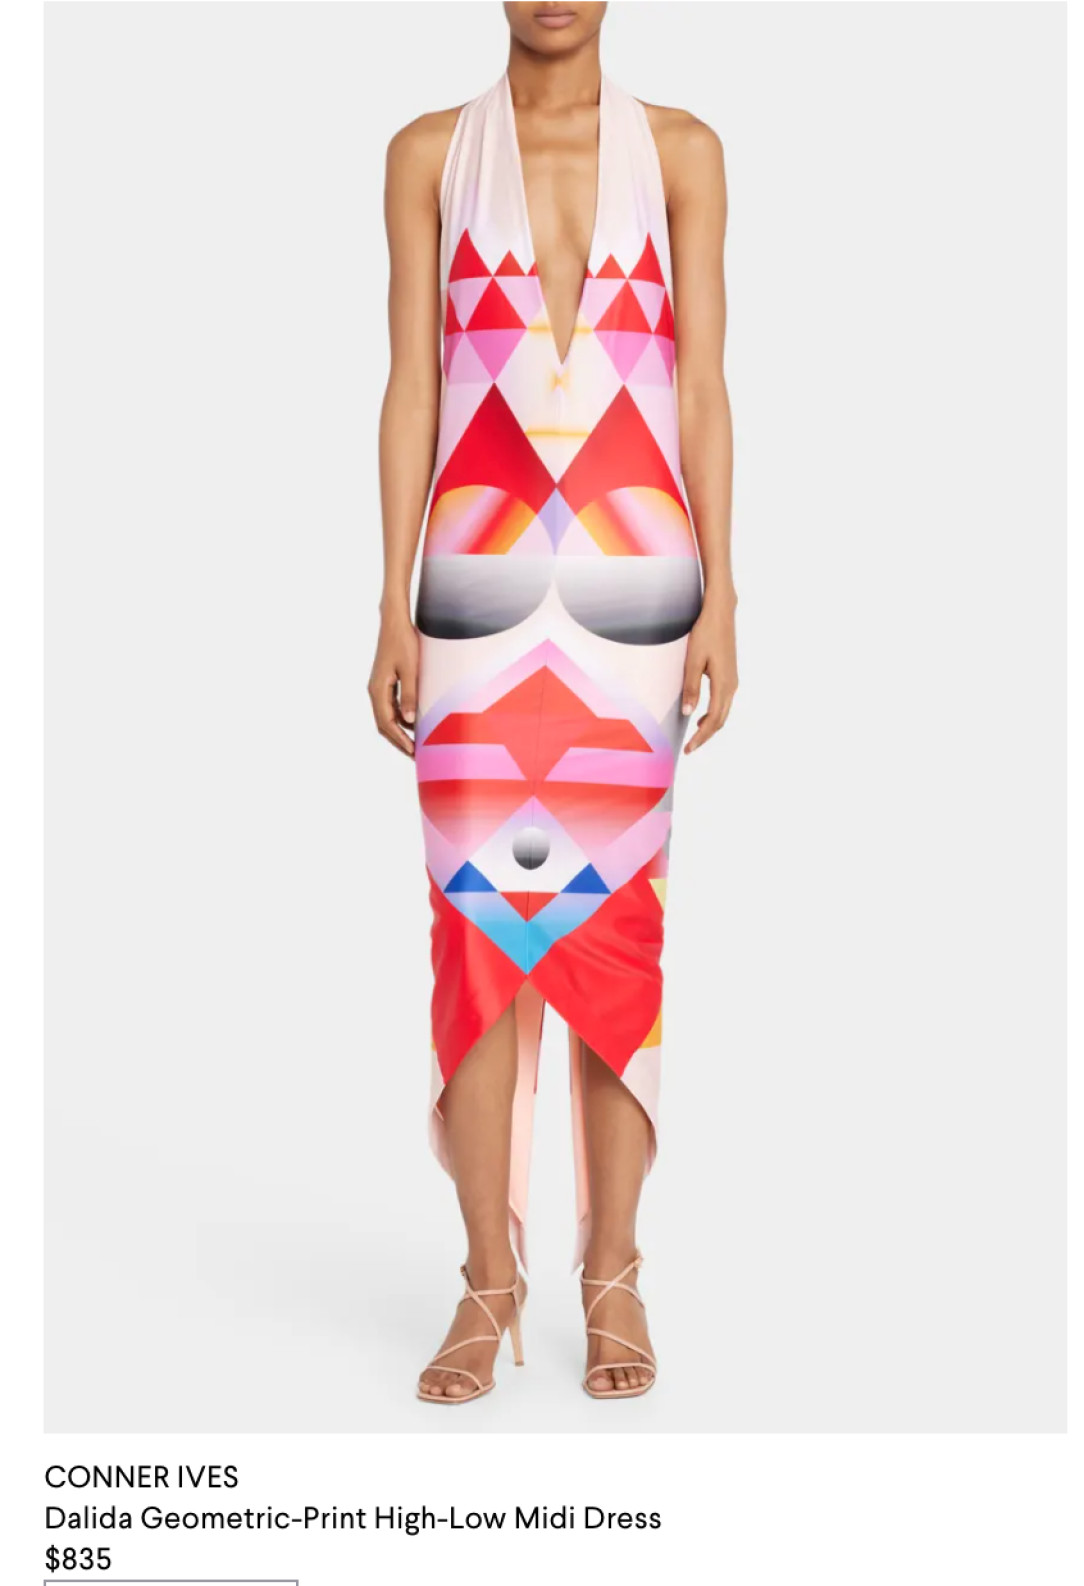 Simultaneously Too High and Too Low - This Dress